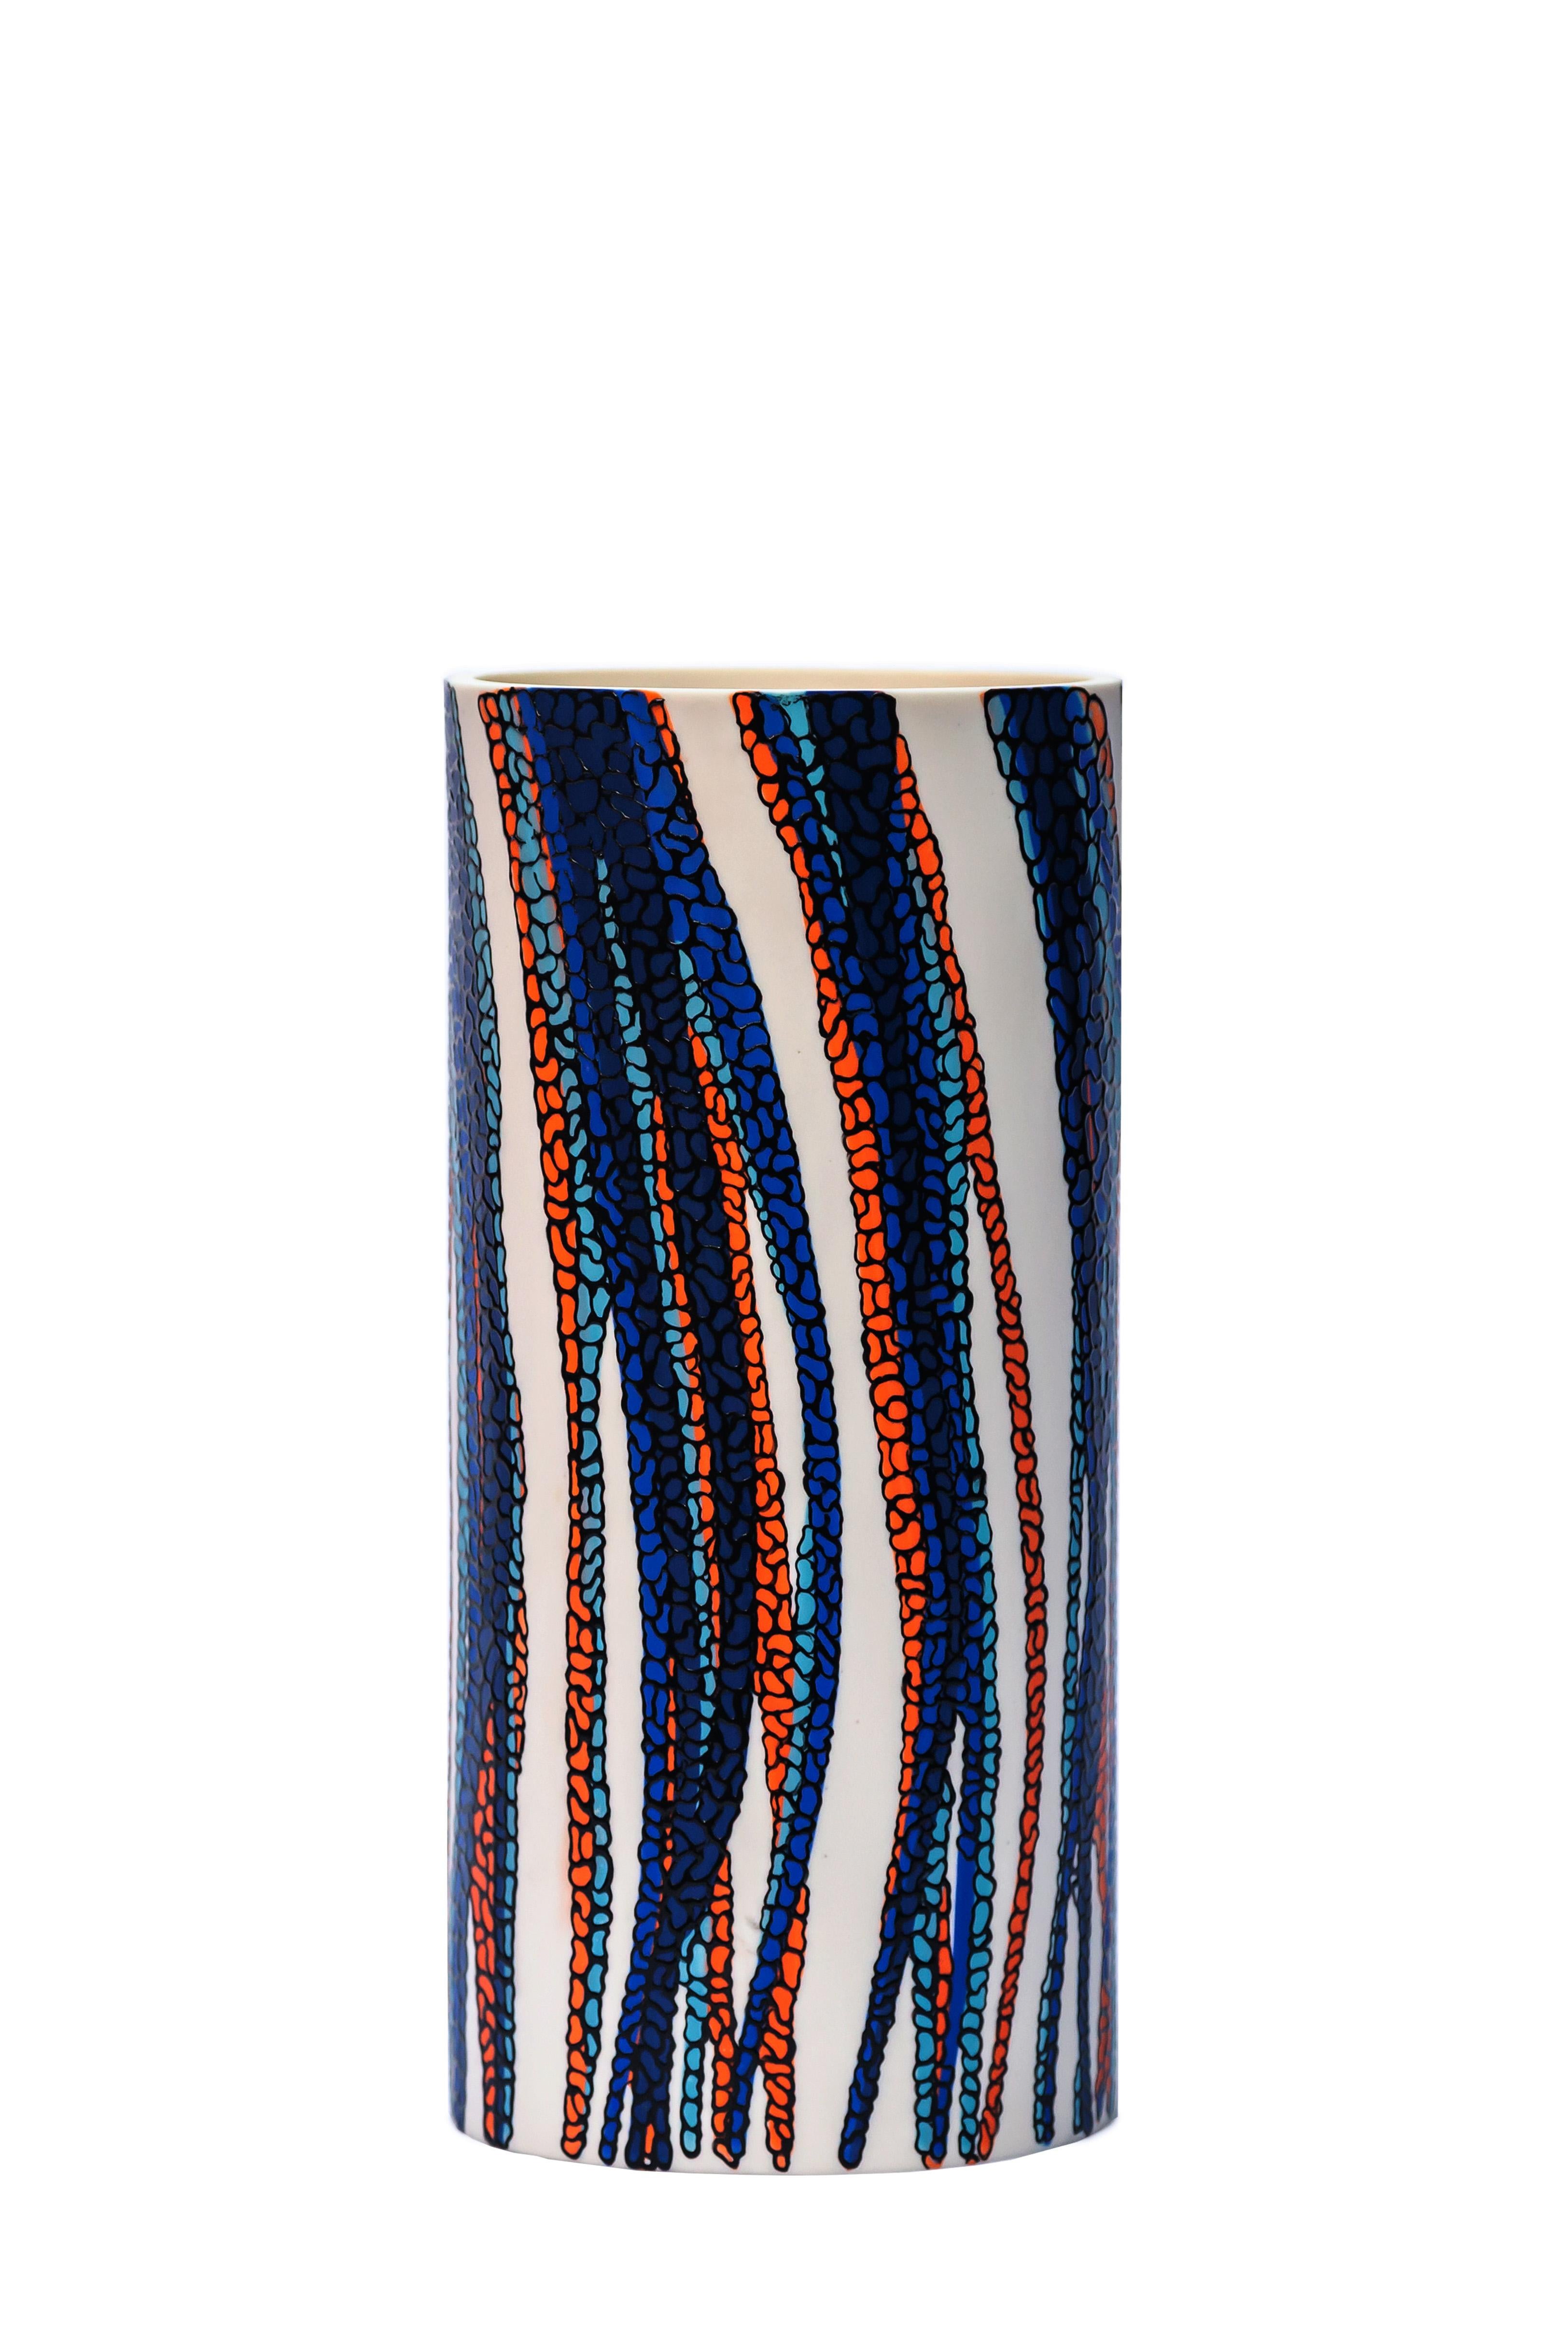 “Dripping Beans tall”, 2021 Porcelain vase by Eugenio Michelini - Parian ware, dripping stained slips, hand decorated with overglaze. Size = 13.5x28.2 cm
Unique piece handmade 3 firings 

The focus of Eugenio Michelini (Italy, 1970) interest lies